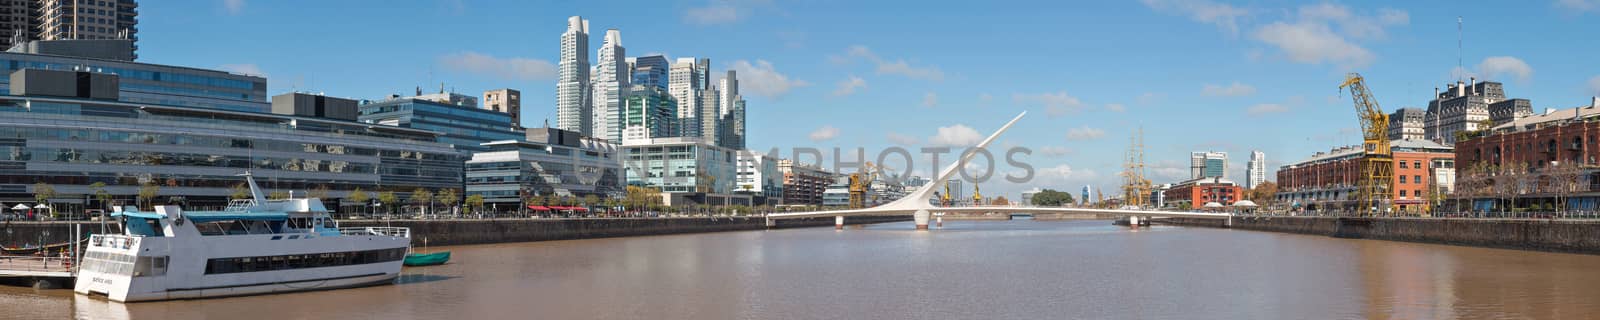 Harbor Puerto Madero Buenos Aires Argentine, skyline and ships